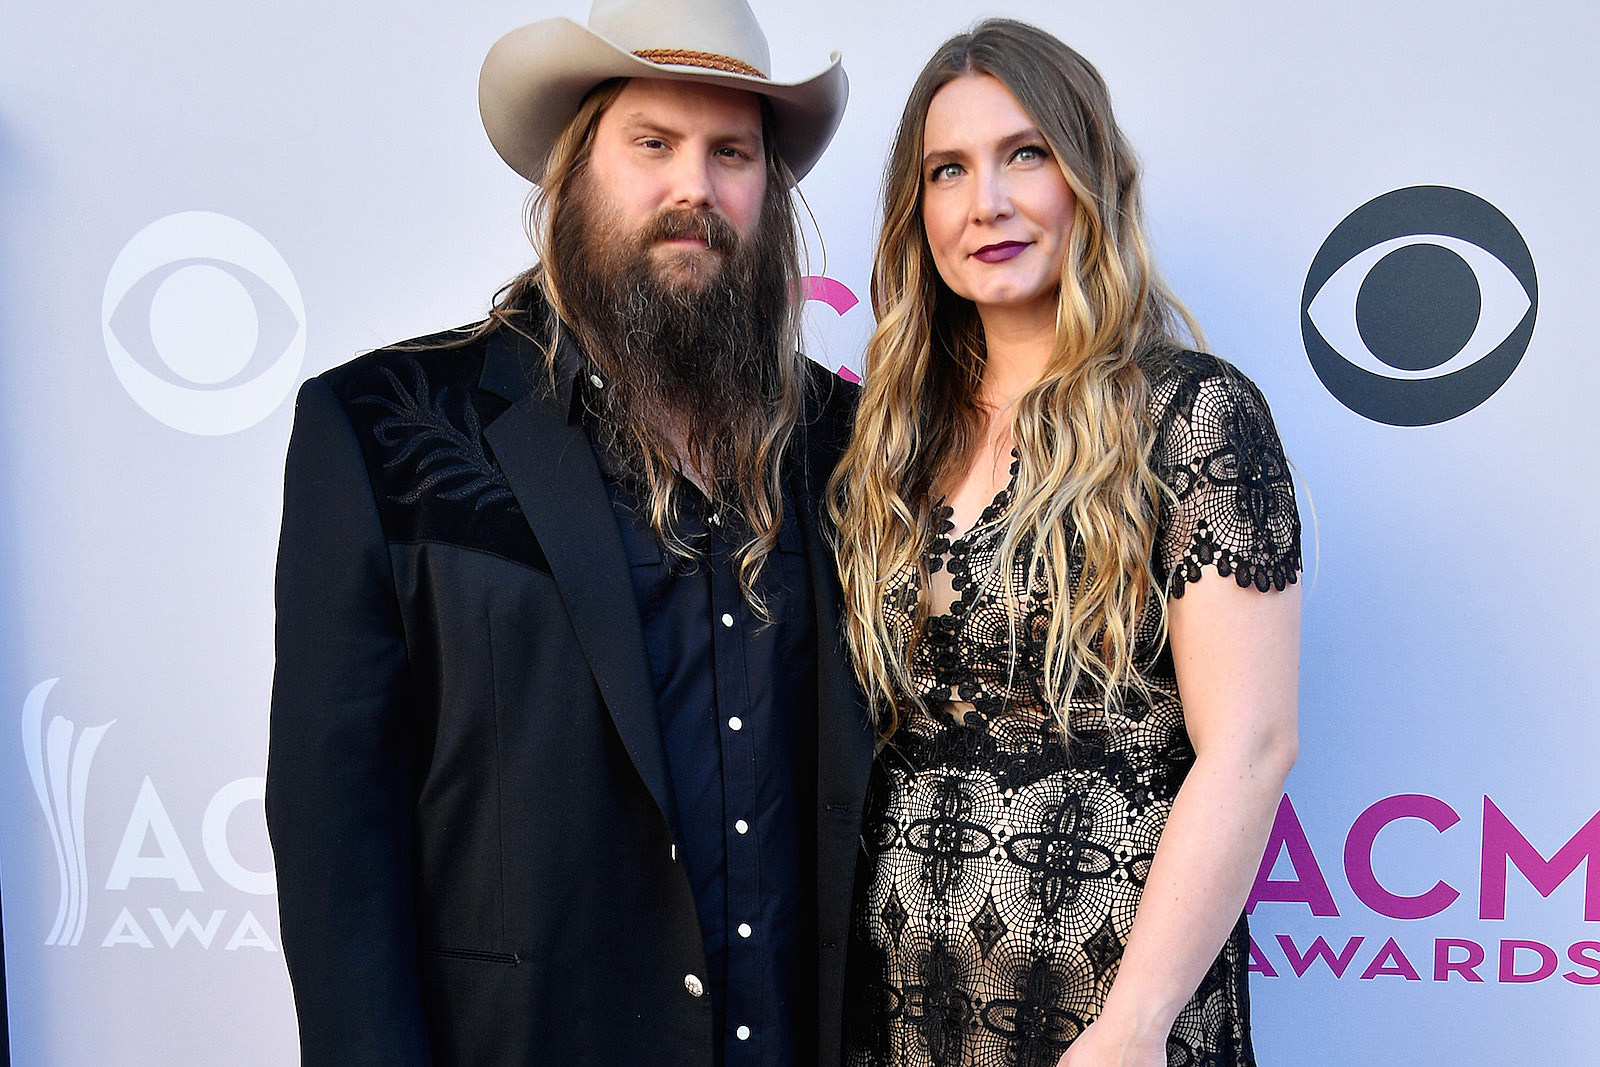 Who is Chris Stapleton's wife? Your daily dose of